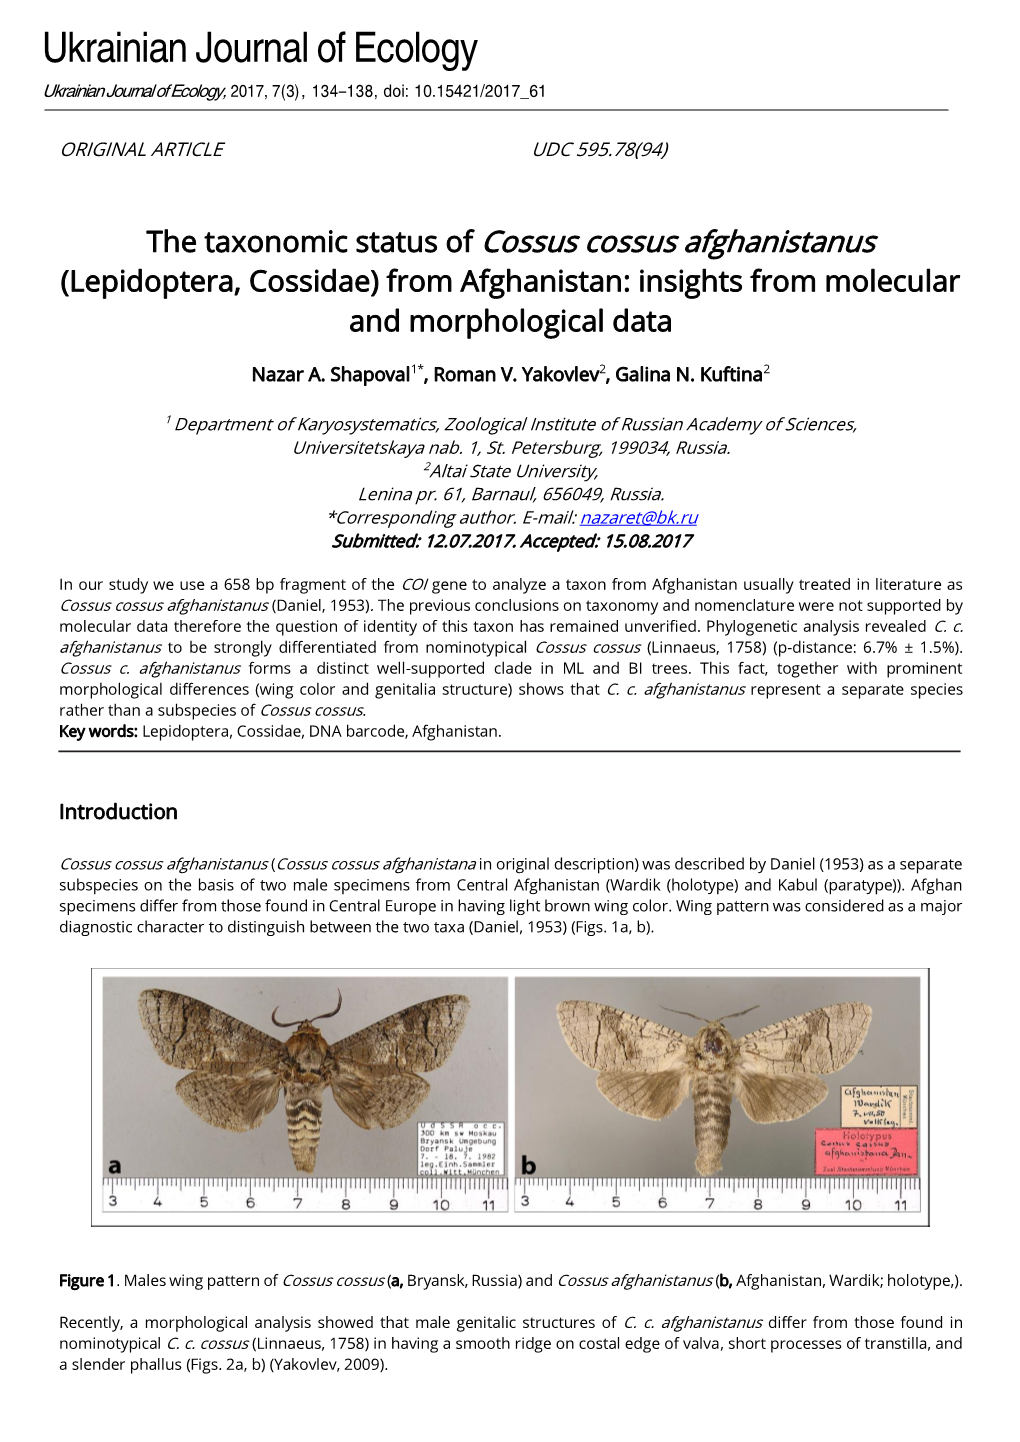 The Taxonomic Status of Cossus Cossus Afghanistanus (Lepidoptera, Cossidae) from Afghanistan: Insights from Molecular and Morphological Data